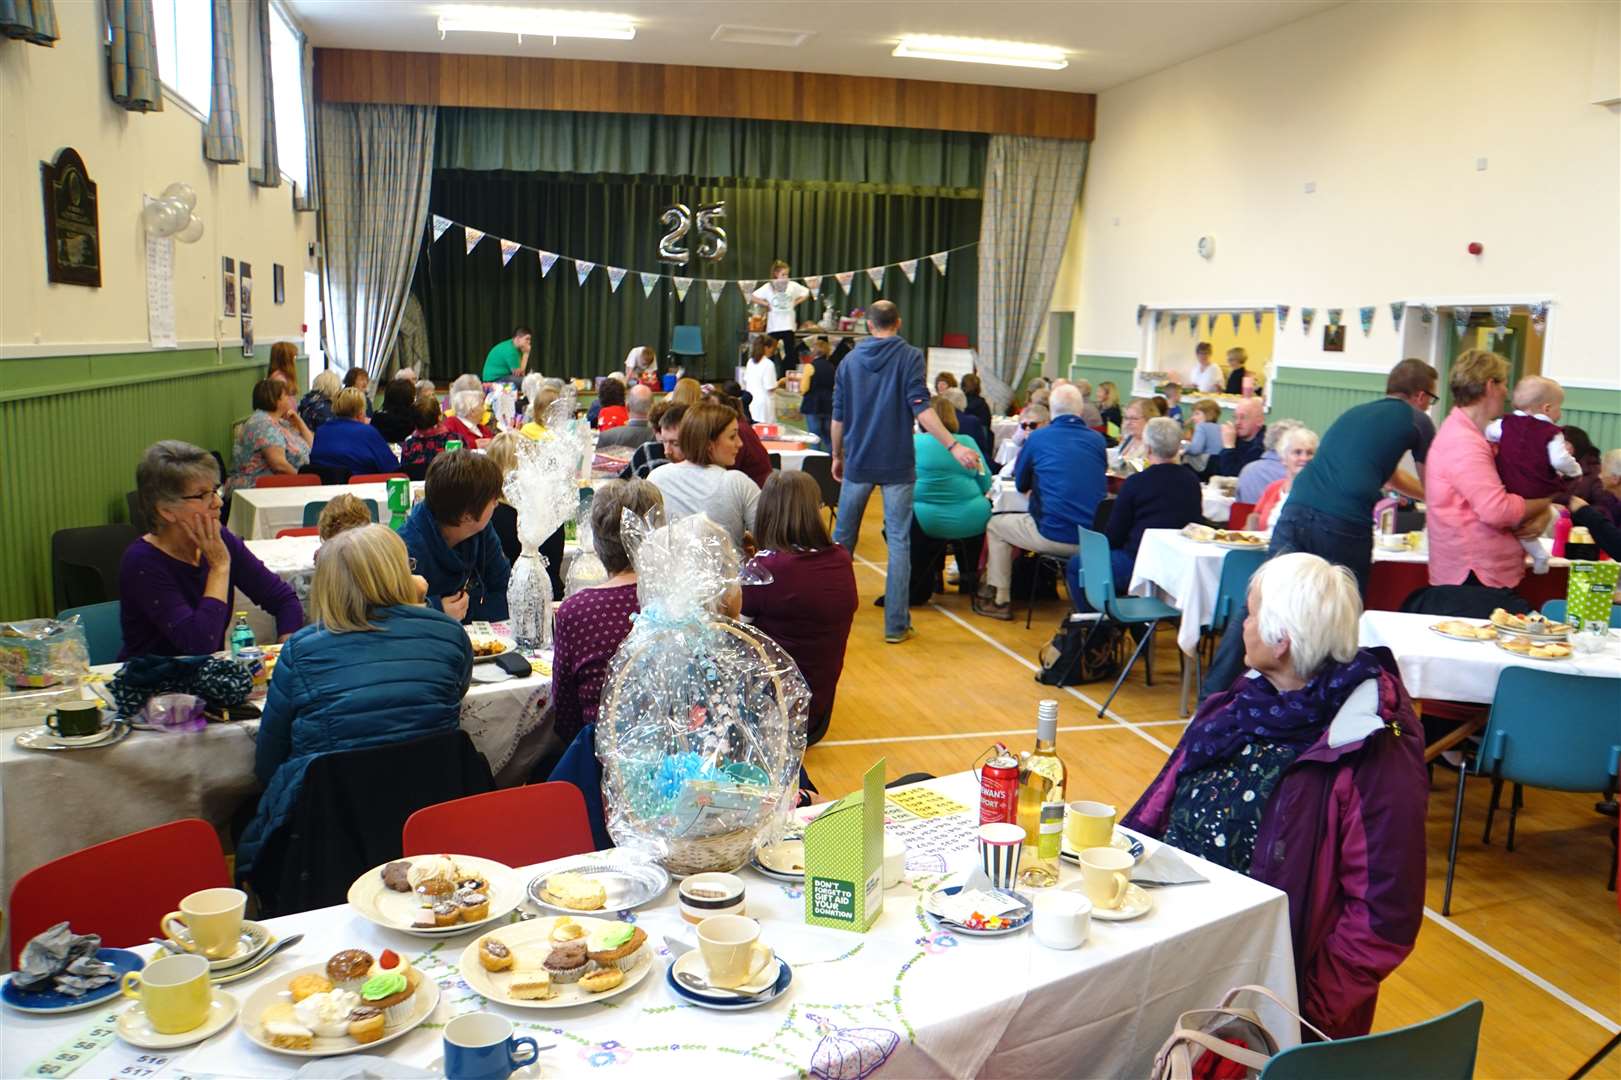 A huge turnout at the Watten coffee morning saw people travelling to the village hall from far and wide.